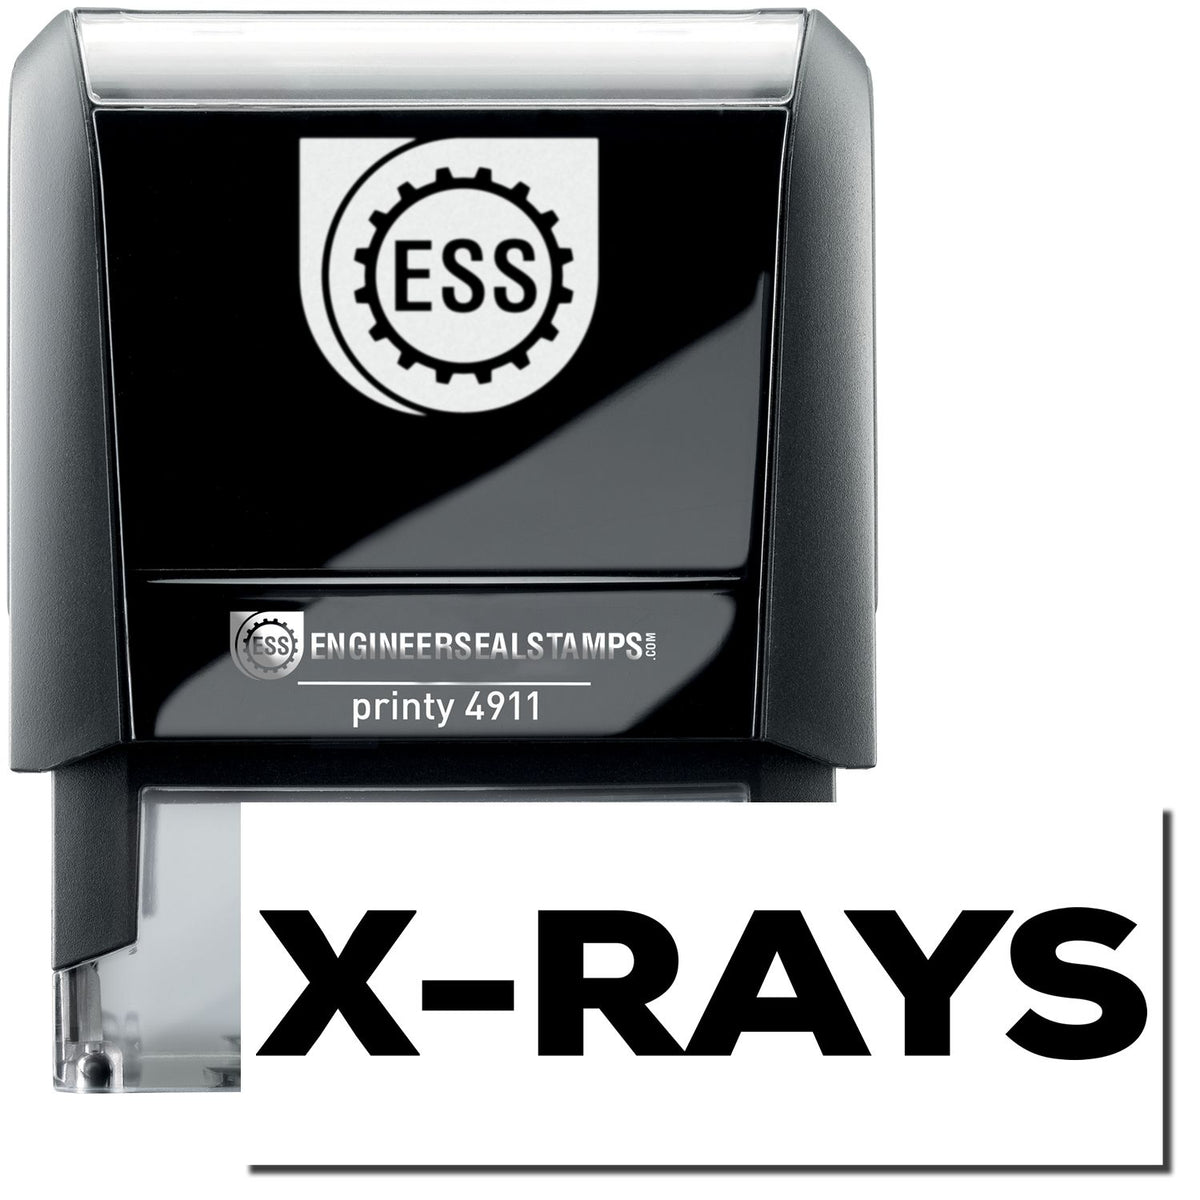 A self-inking stamp with a stamped image showing how the text &quot;X-RAYS&quot; in bold font is displayed after stamping.